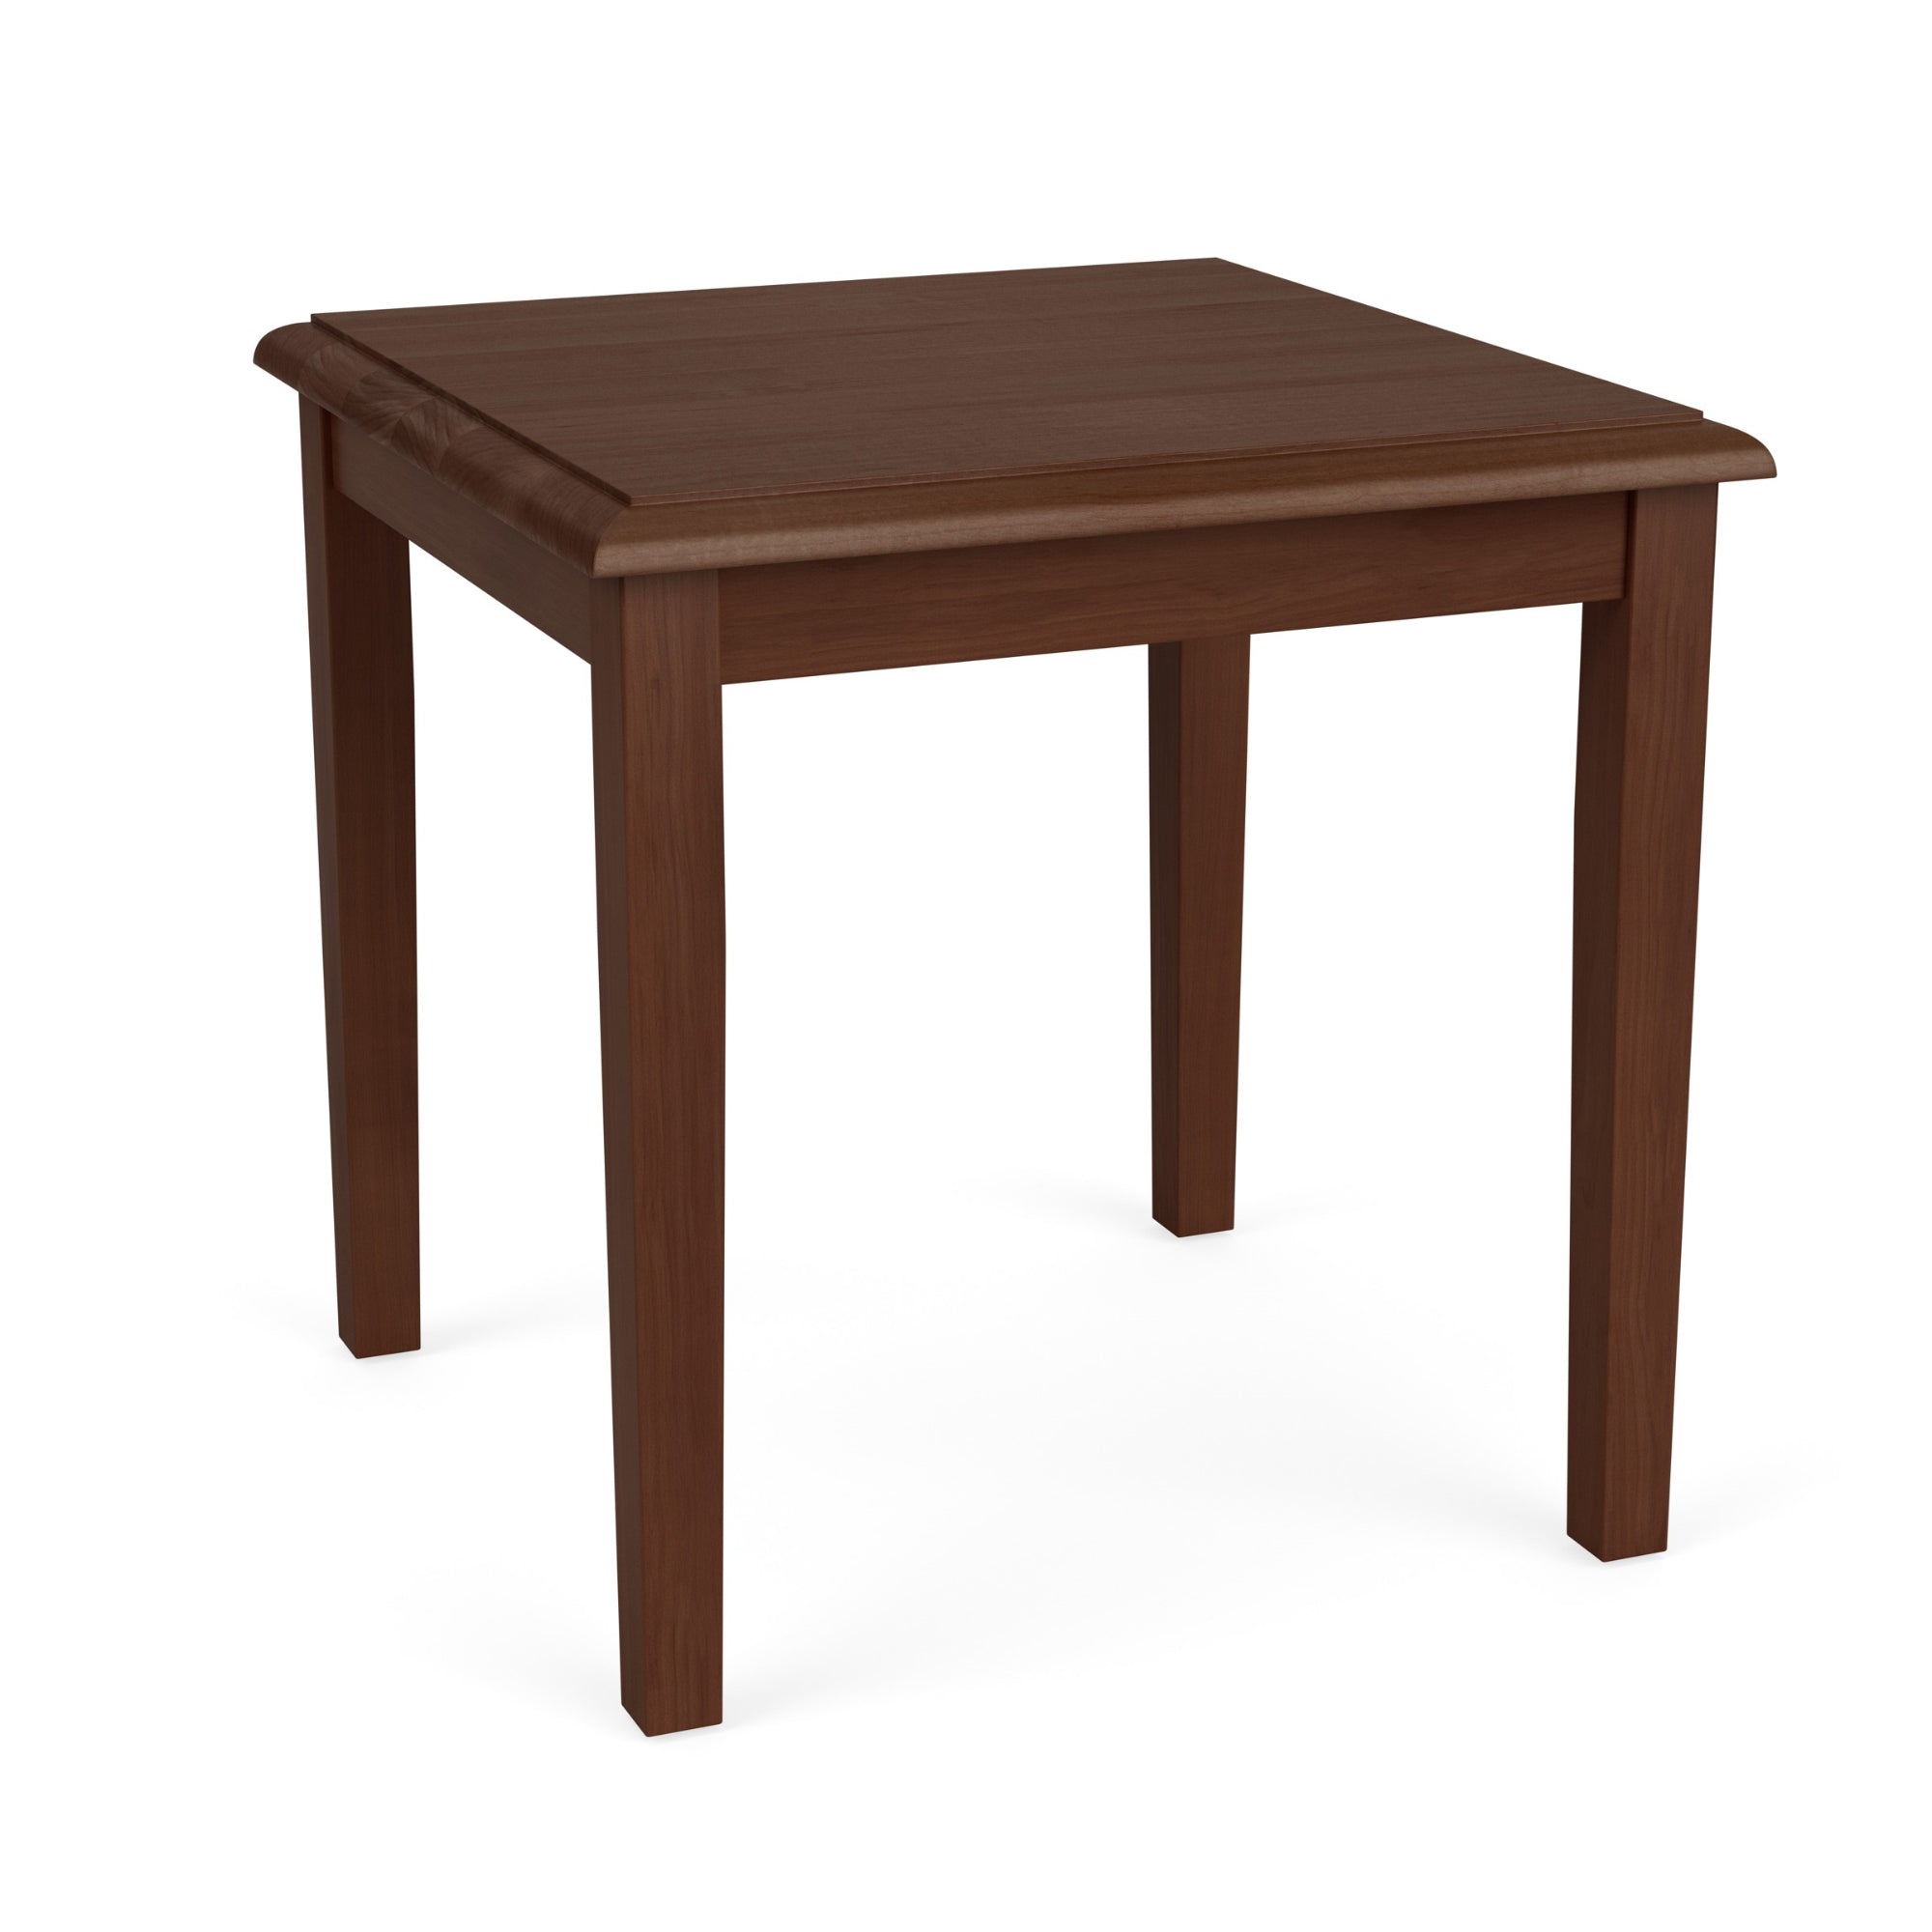 Lenox Wood Collection End Table, Solid Wood Tabletop, FREE SHIPPING